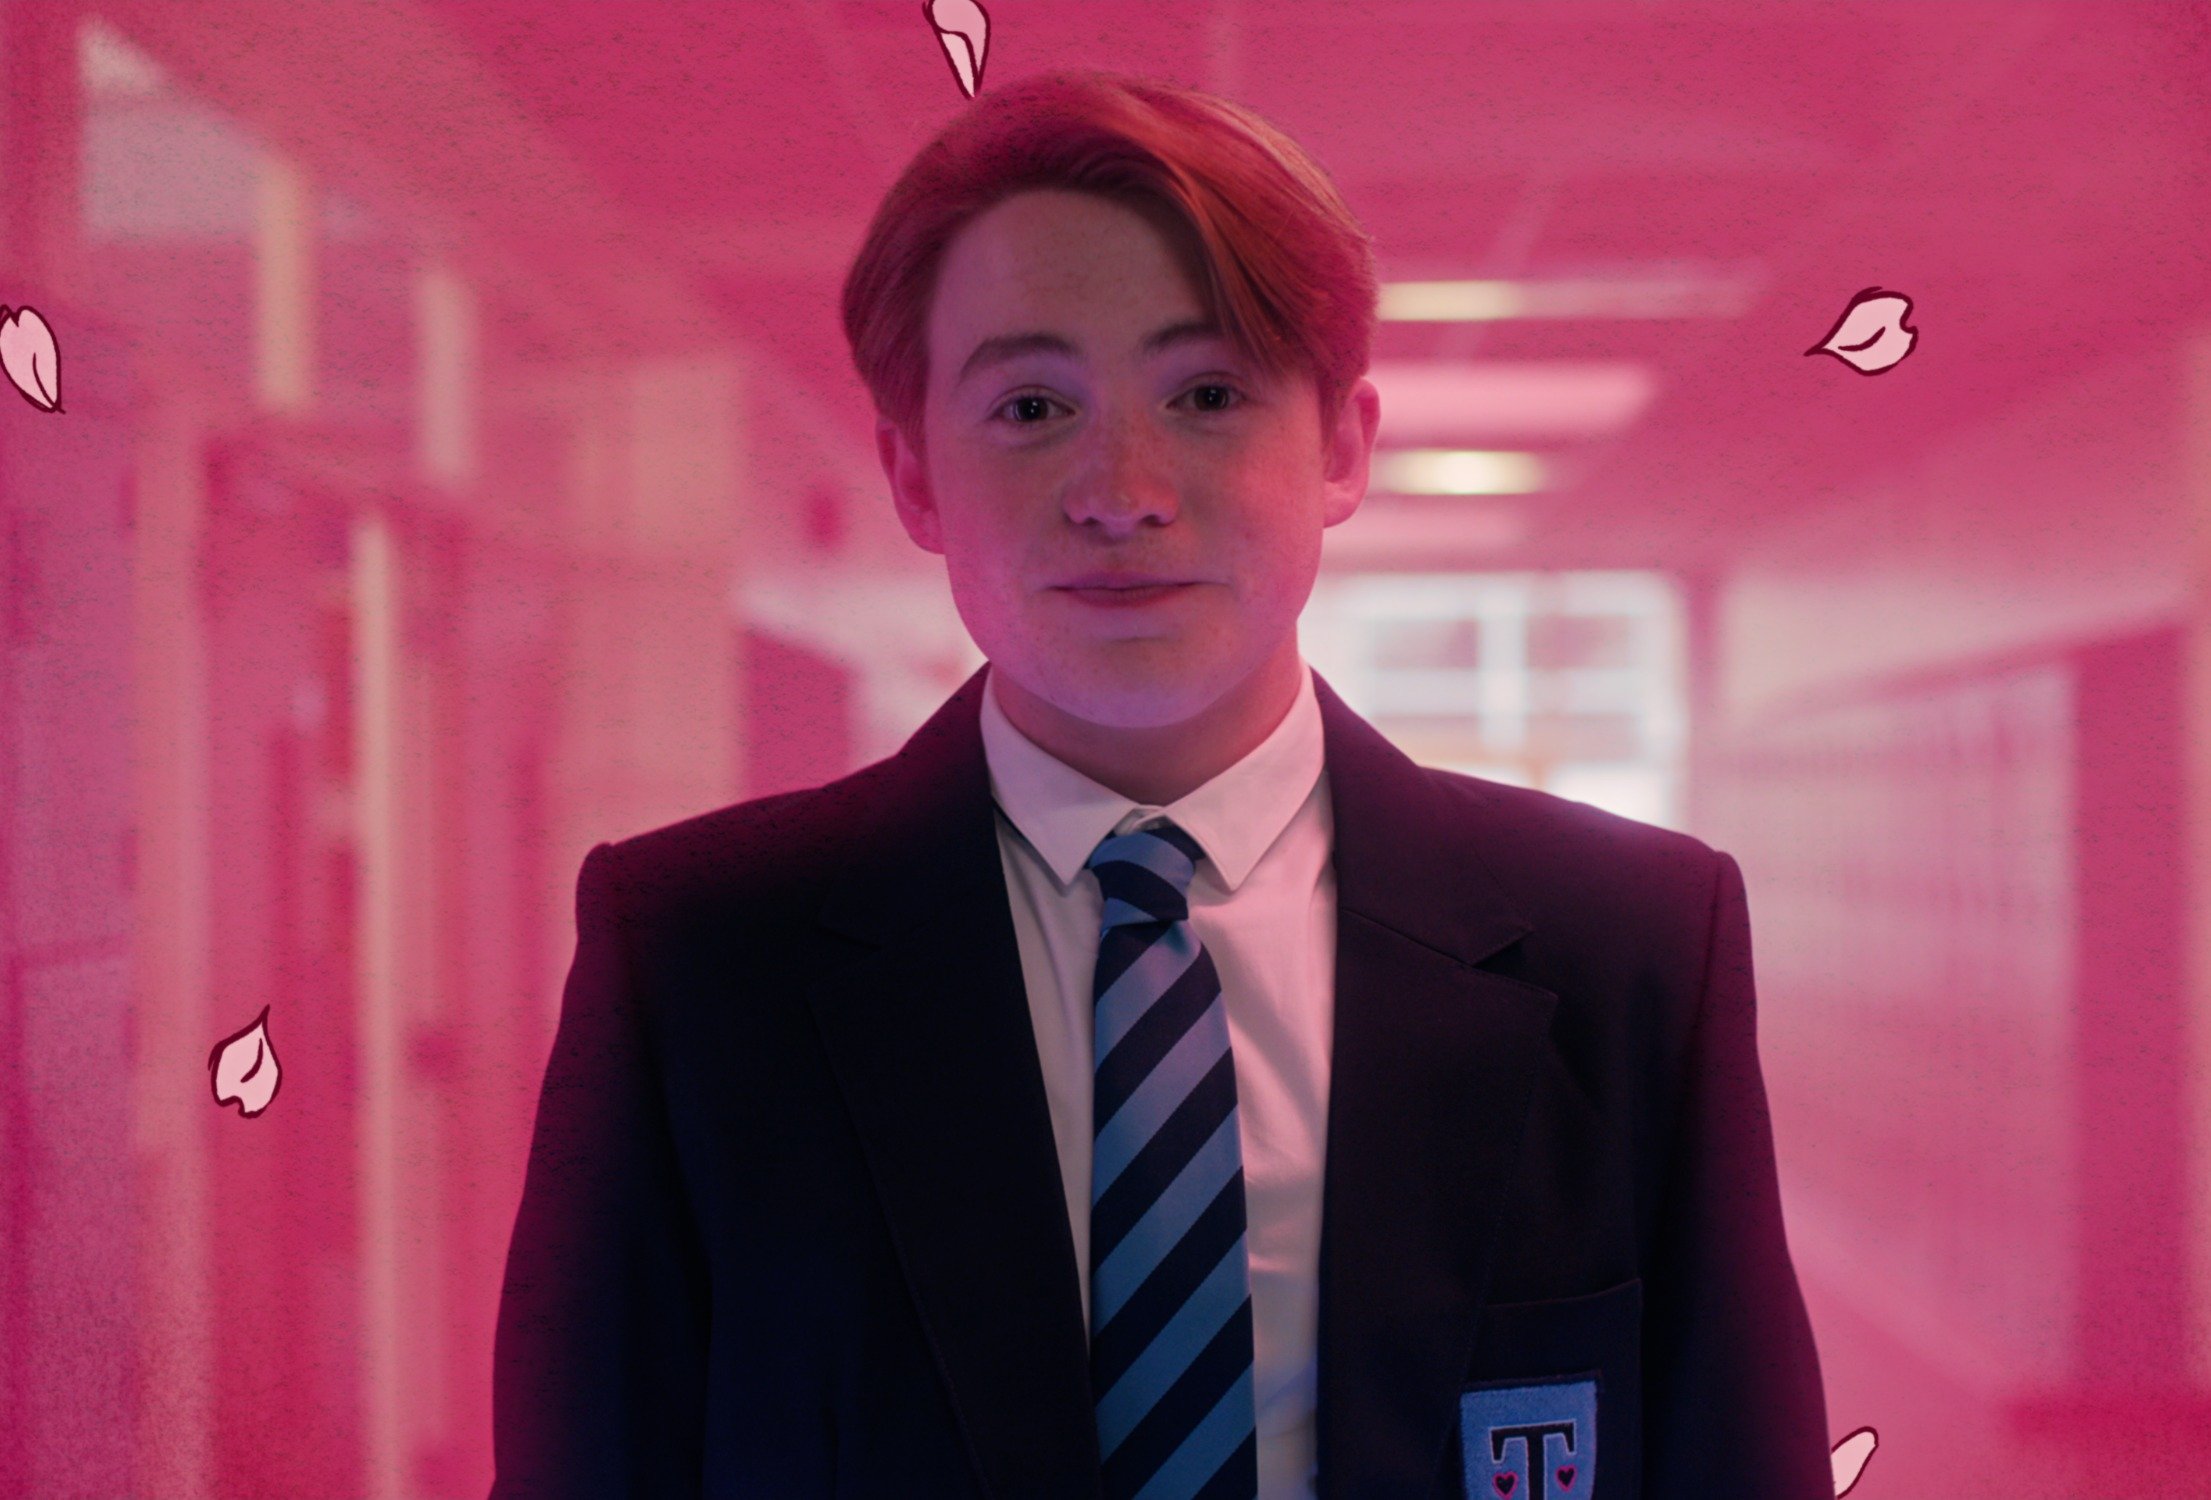 Kit Connor as Nick Nelson in Netflix's 'Heartstopper' show, which adapts Alice Oseman's books. He's wearing a school uniform and smiling, and everything around him has a pink lighting.